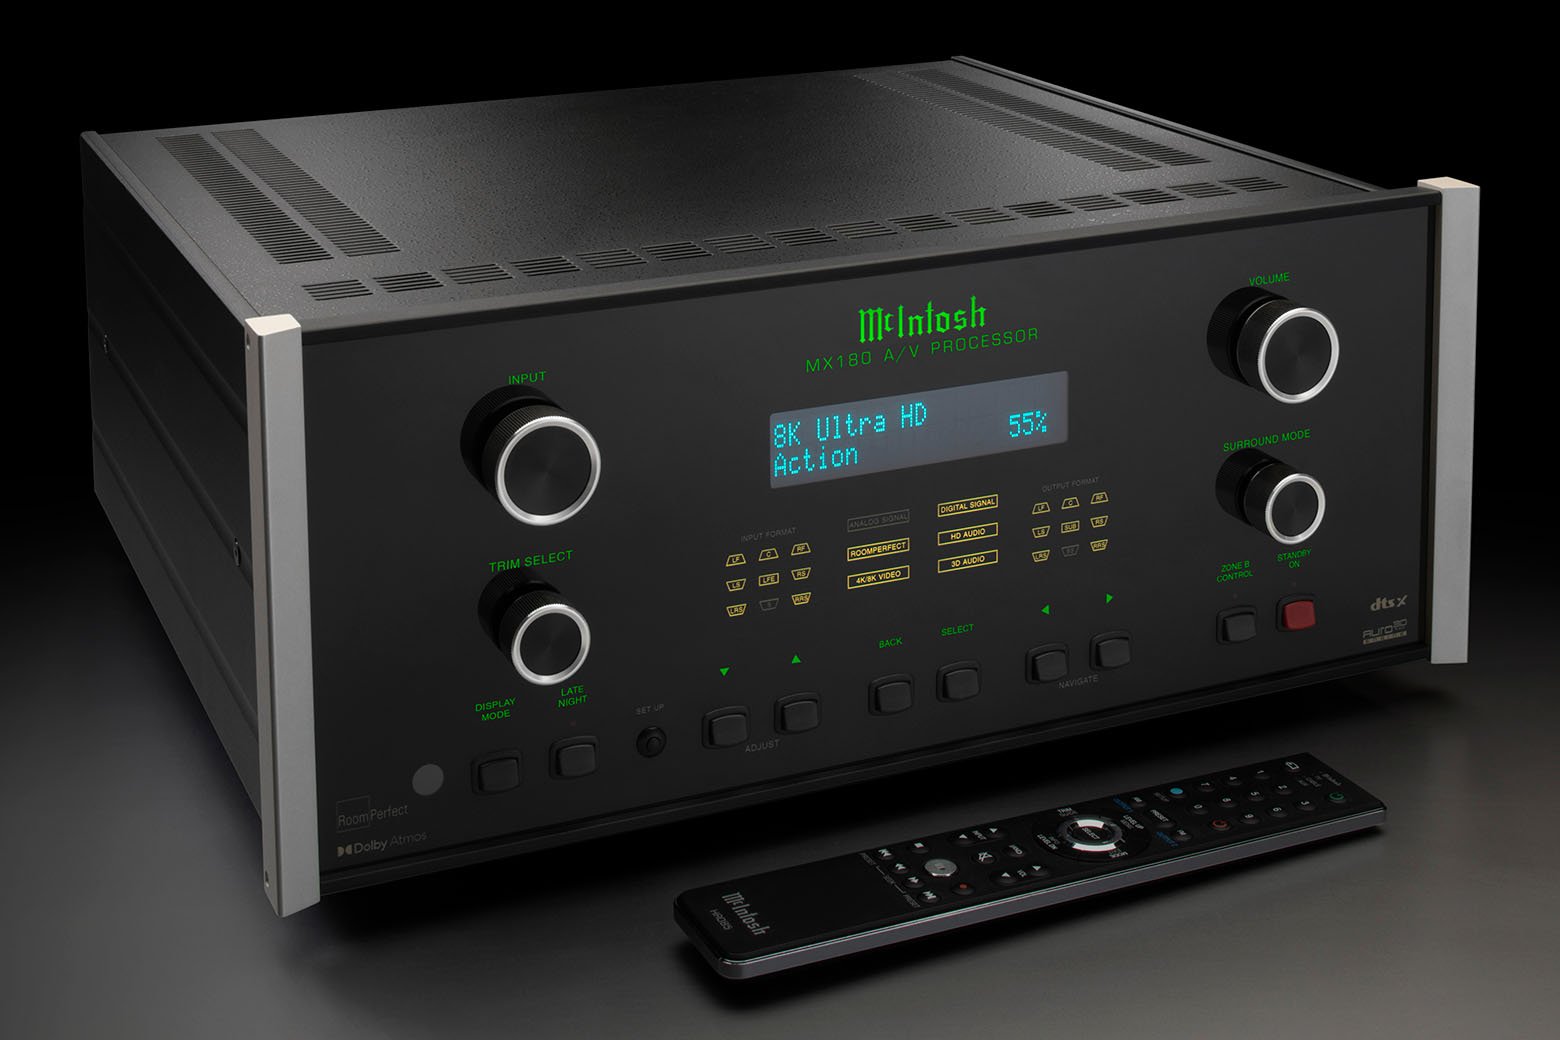 McIntosh MX180  A/V Processor (In-Store Purchases Only & USD Pricing）